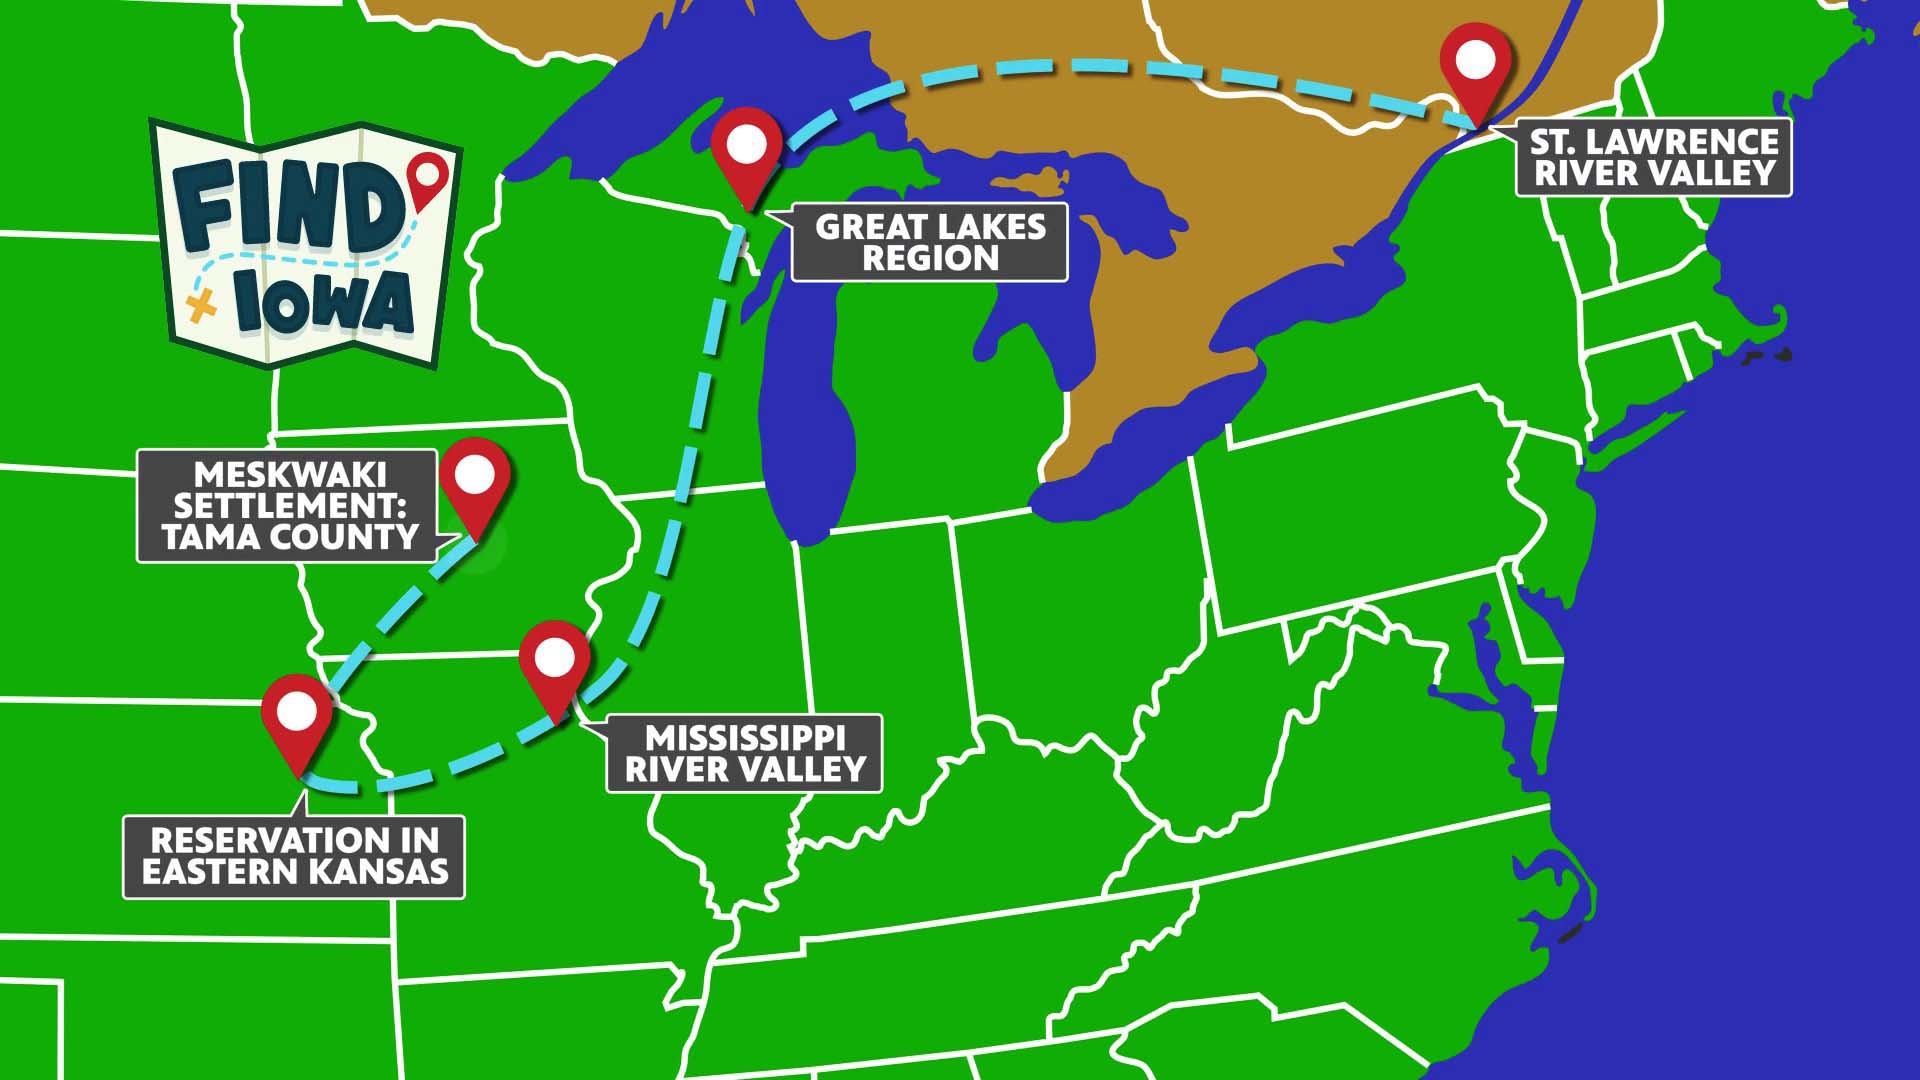 Animated map showing the various places that the Meskwaki Tribe has settled over time.